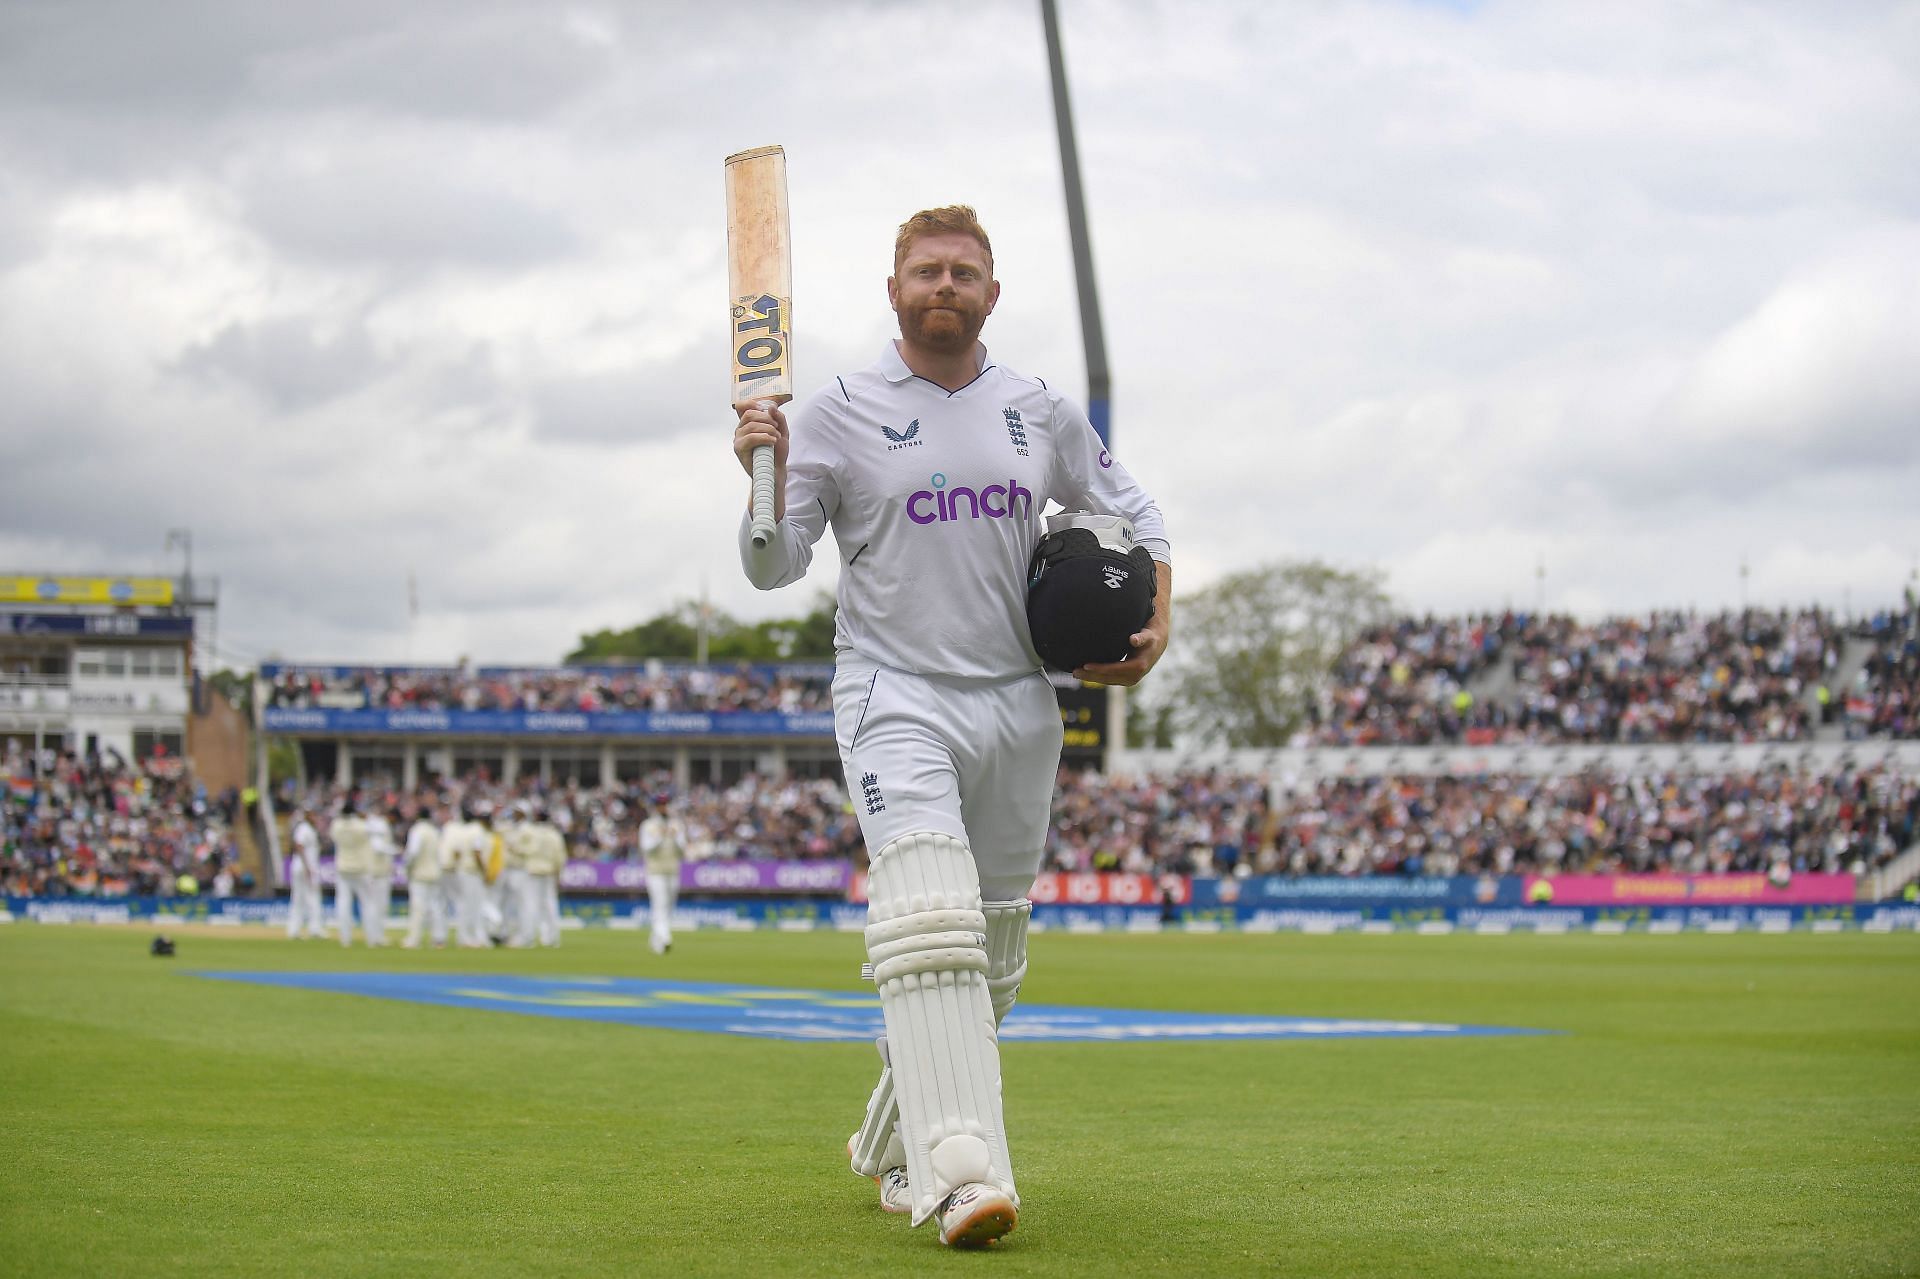 Jonny Bairstow now has the most runs in Test cricket in 2022. (Image courtesy: Getty)